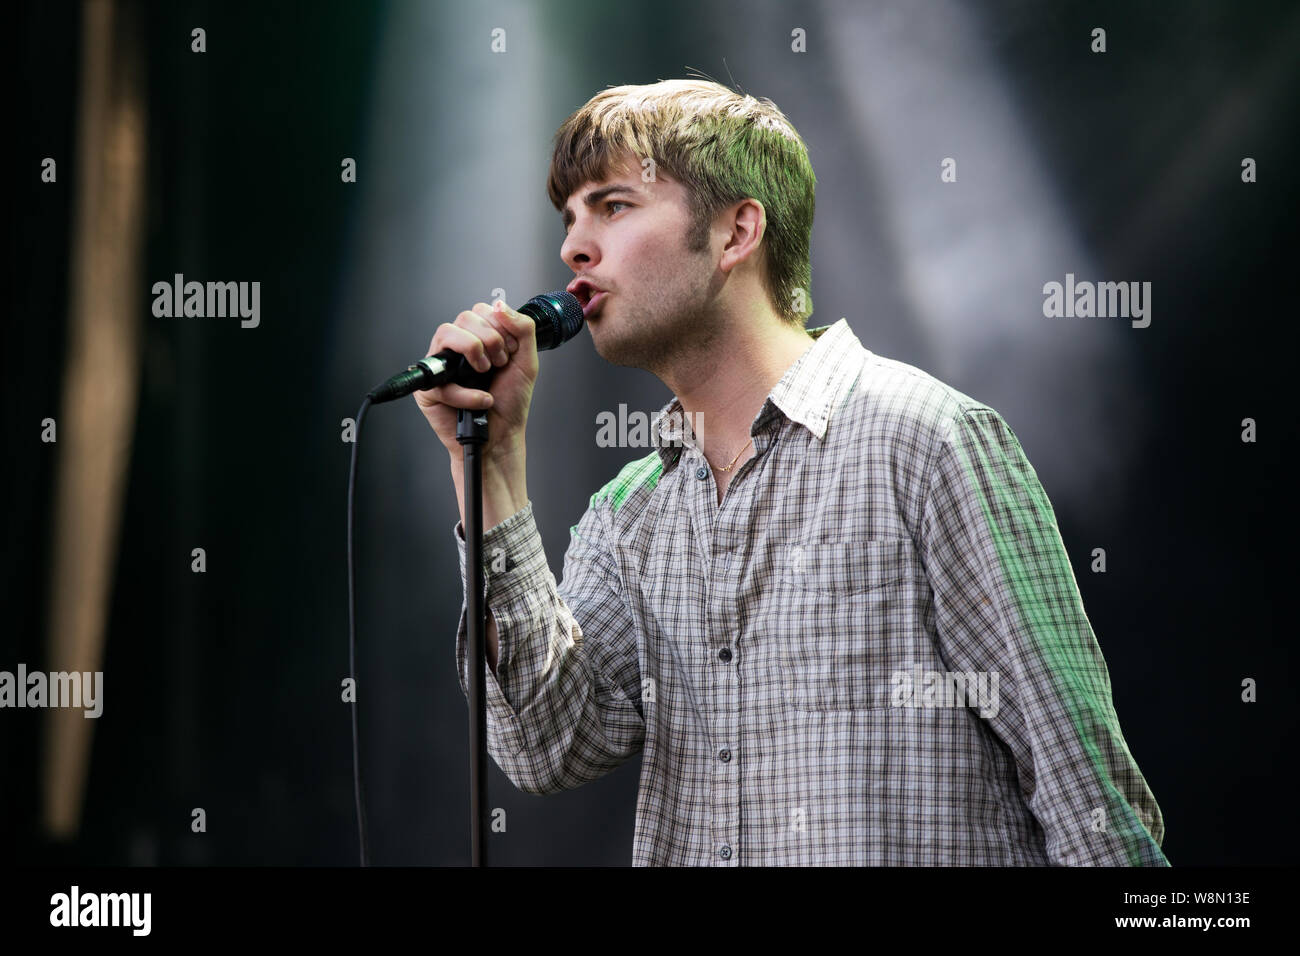 Oslo, Norway. 08th, August 2019. The Irish punk band Fontaines D.C. performs a live concert during the Norwegian music festival Øyafestivalen 2019 in Oslo. Here vocalist Grian Chatten is seen live on stage. (Photo credit: Gonzales Photo - Per-Otto Oppi). Stock Photo